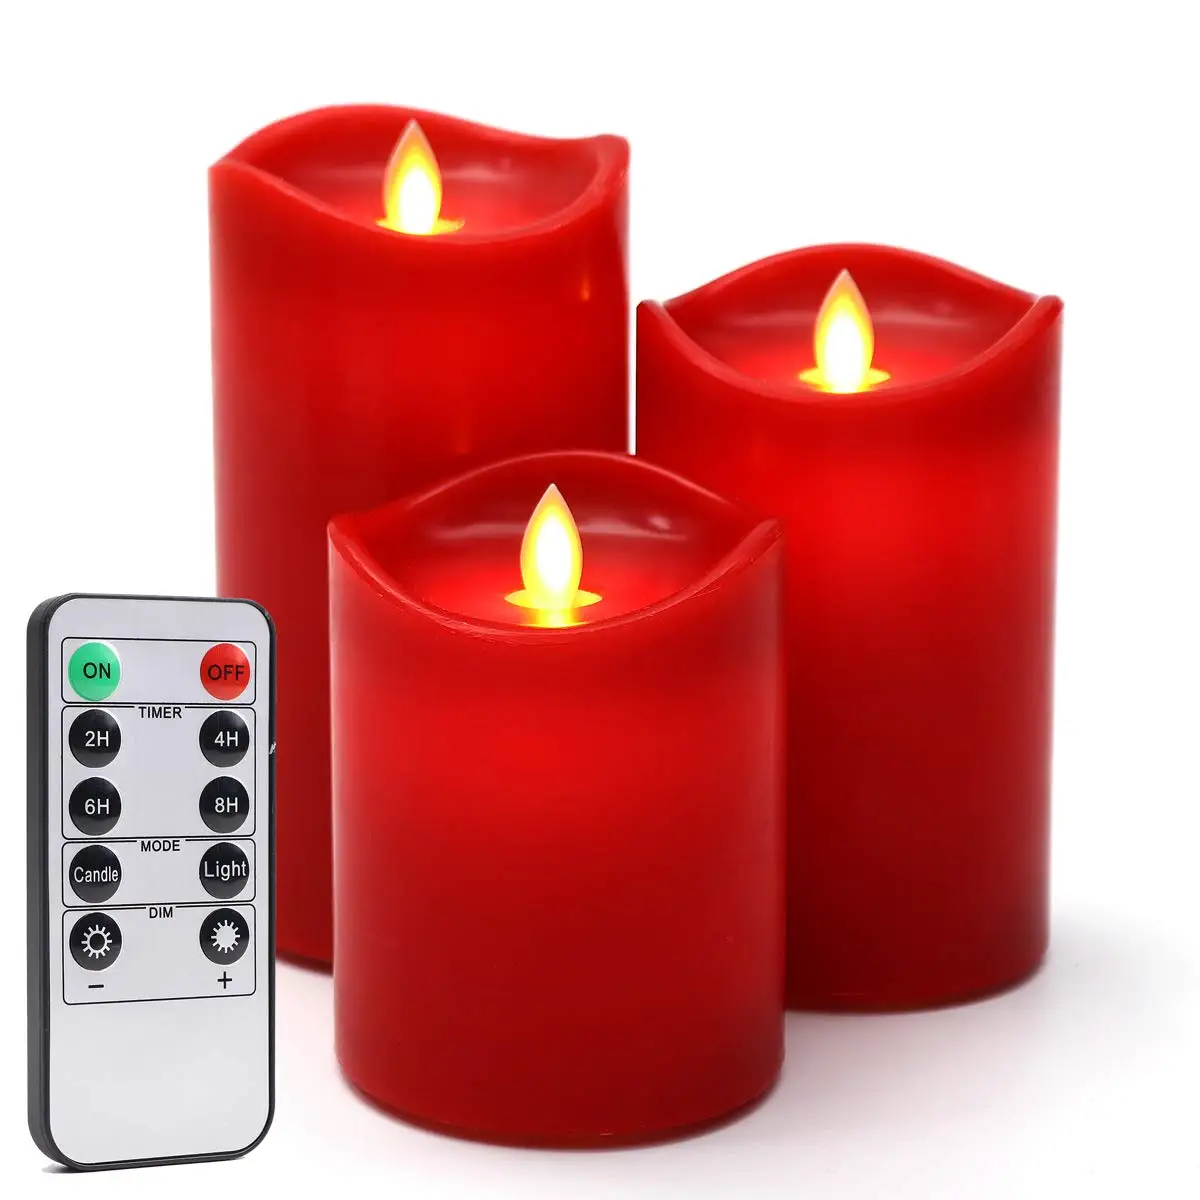 

Flameless Battery Operated LED Candles Light with Remote Control Timer Function Night Light for Wedding Party Home Decor